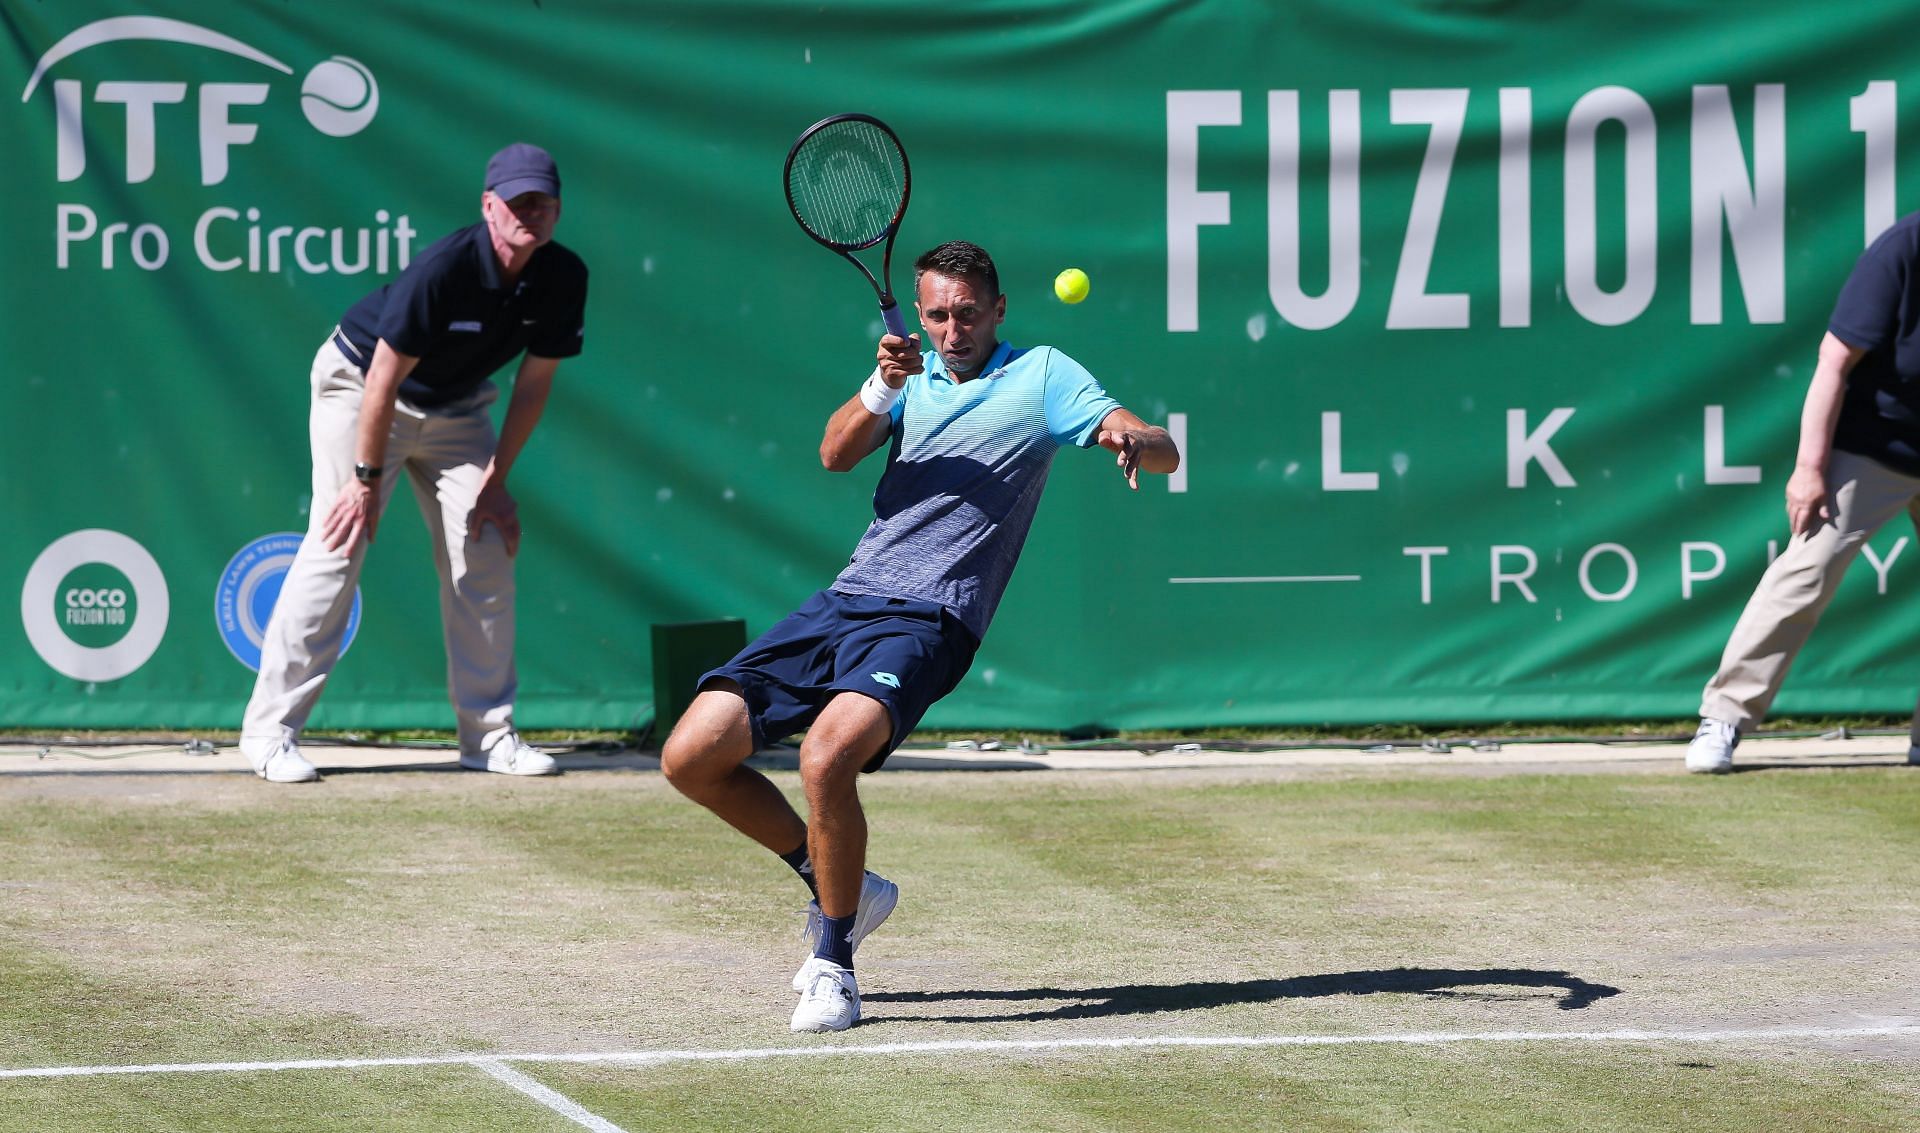 Sergiy Stakhovsky in action at the Fuzion 100 Ilkley Trophy